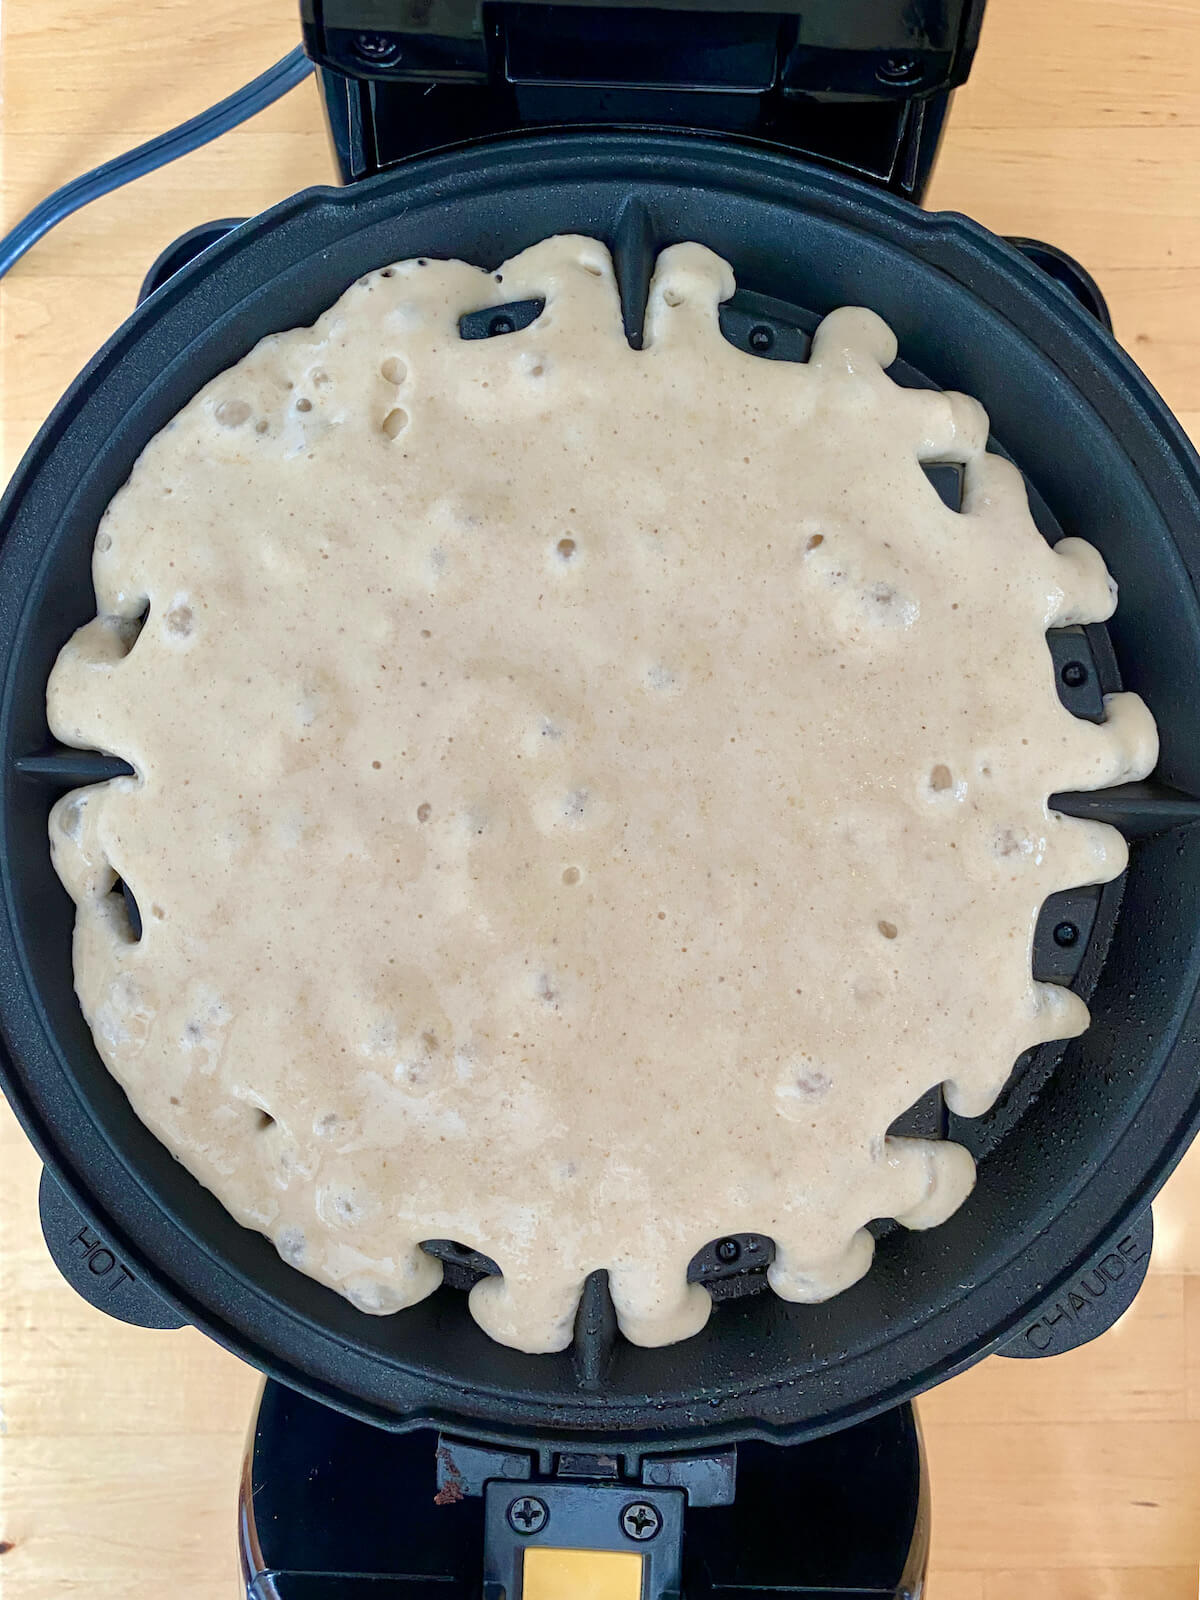 An oat flour waffle cooking in a waffle iron.